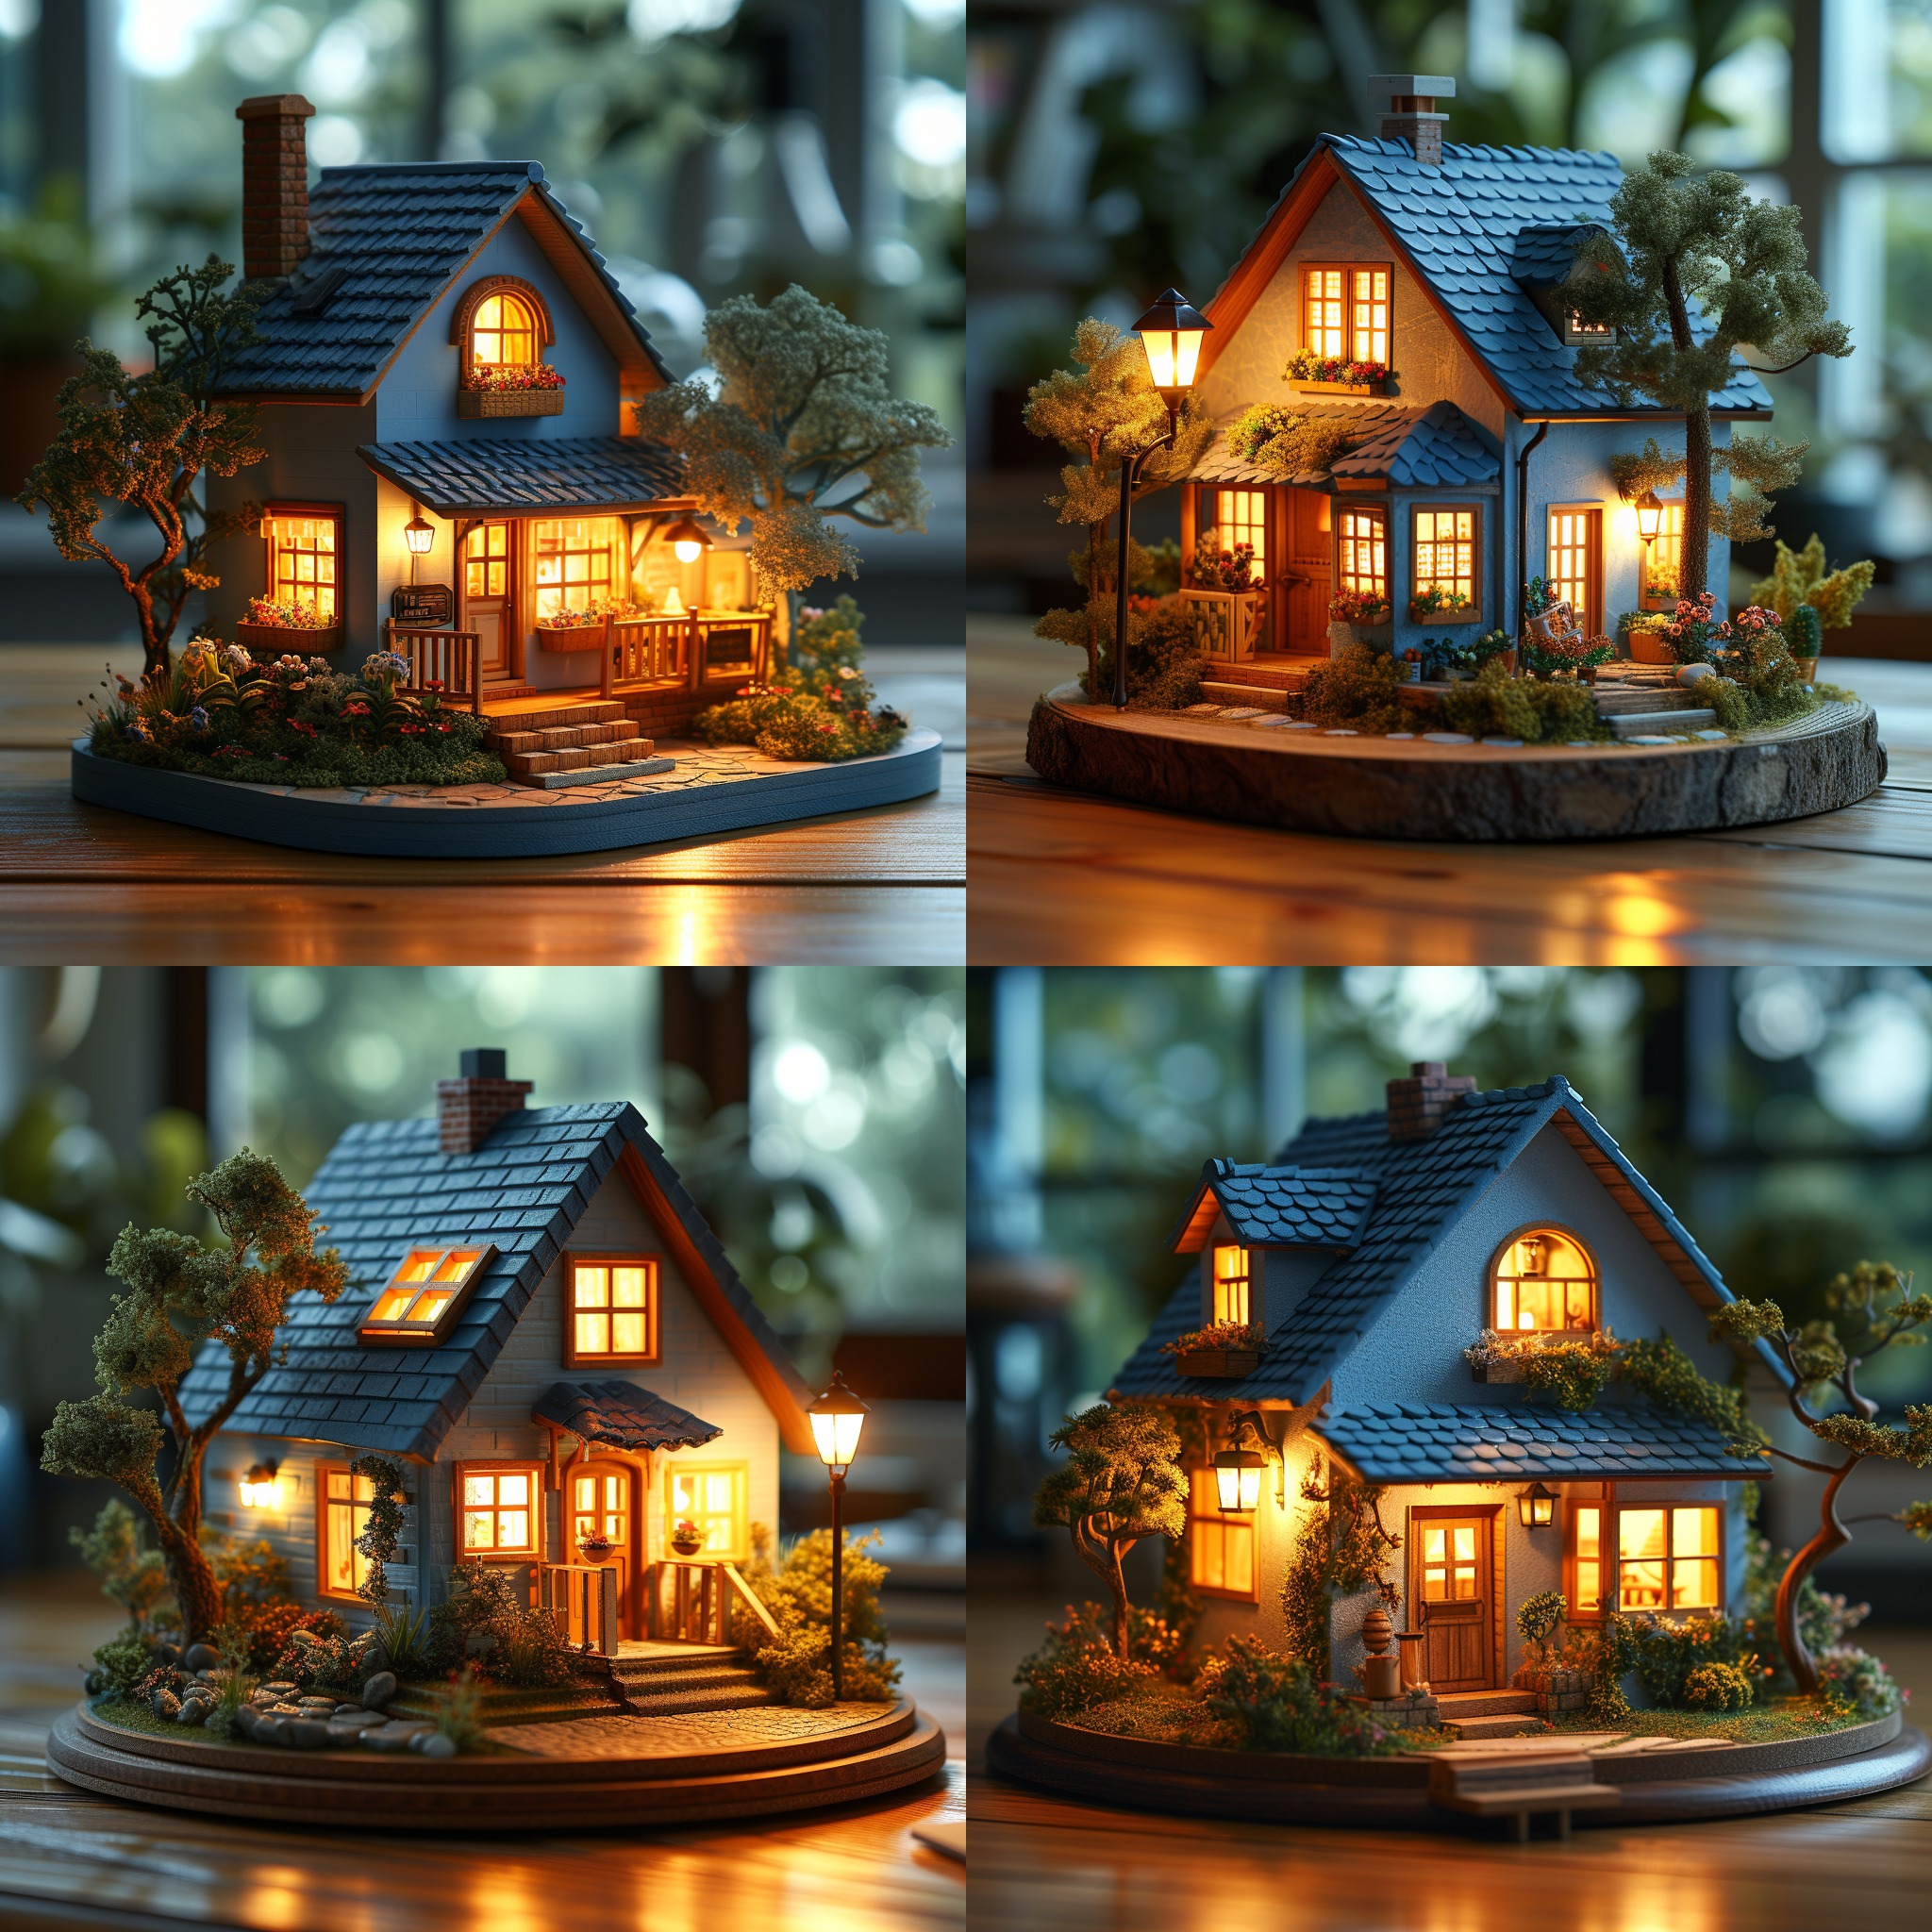 rachnamittal_toy_house_on_desk_lamp_light_on_a7829416-239f-41be-8ff9-94dfb63c64f6